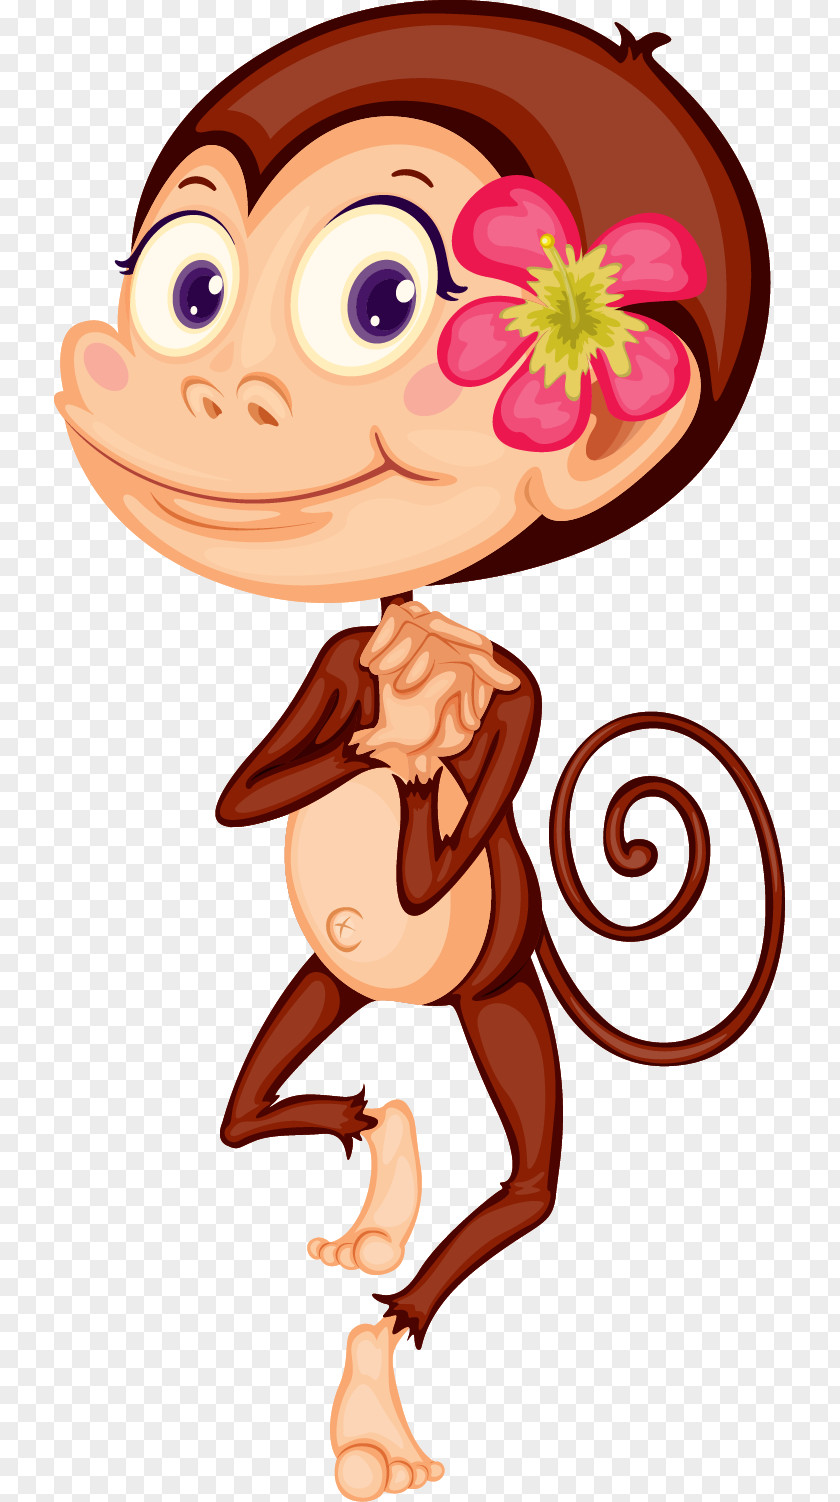 Head Of The Monkey Wearing Flowers Jumping Trampoline Royalty-free Illustration PNG